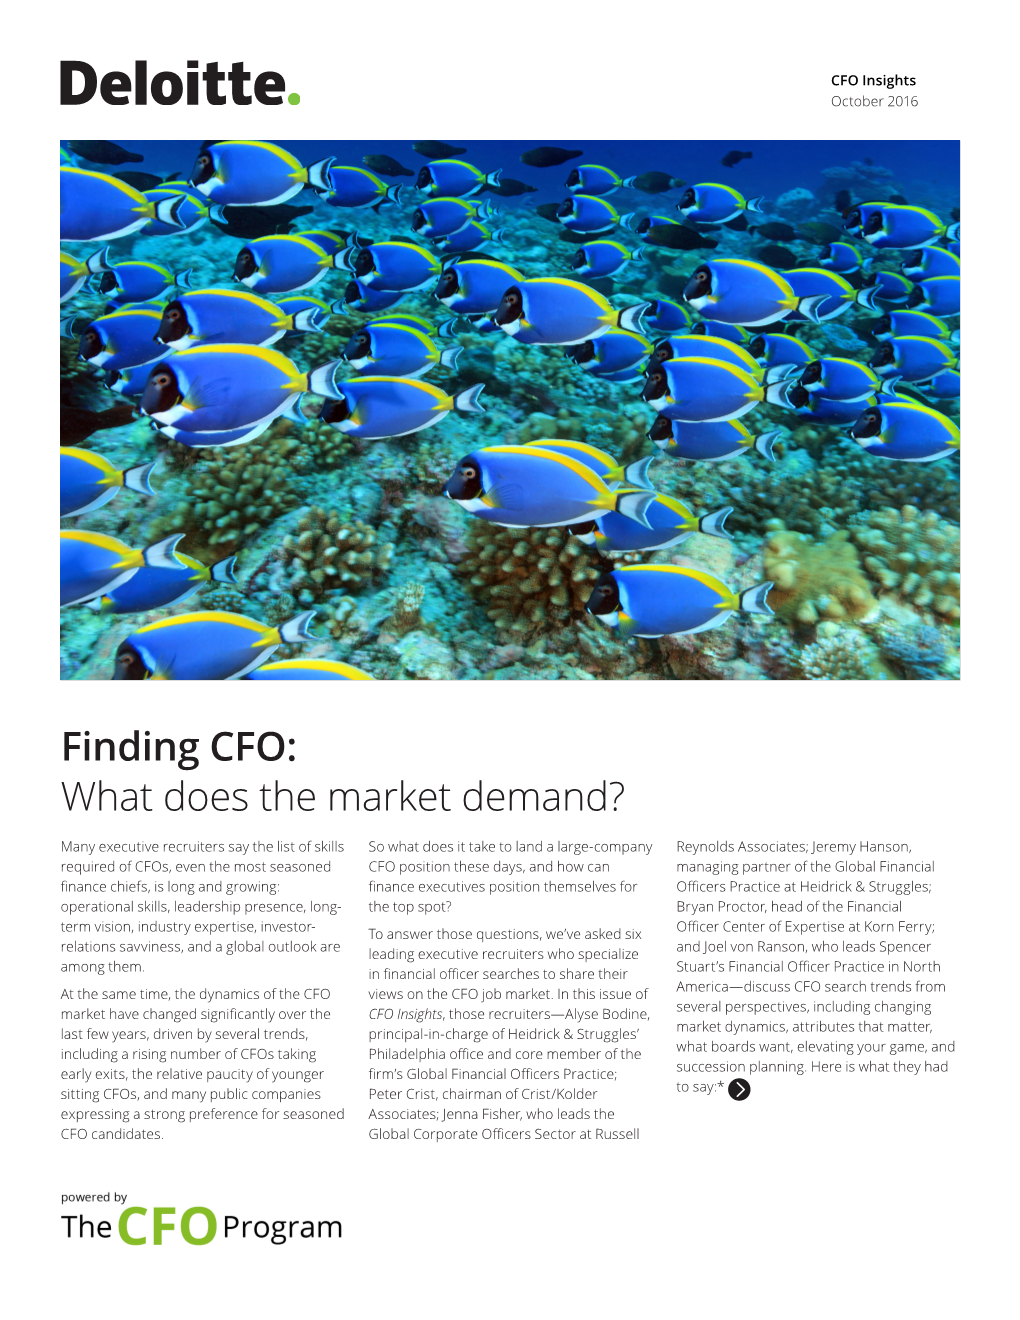 Download the CFO Insights. Finding CFO: What Does the Market Demand?